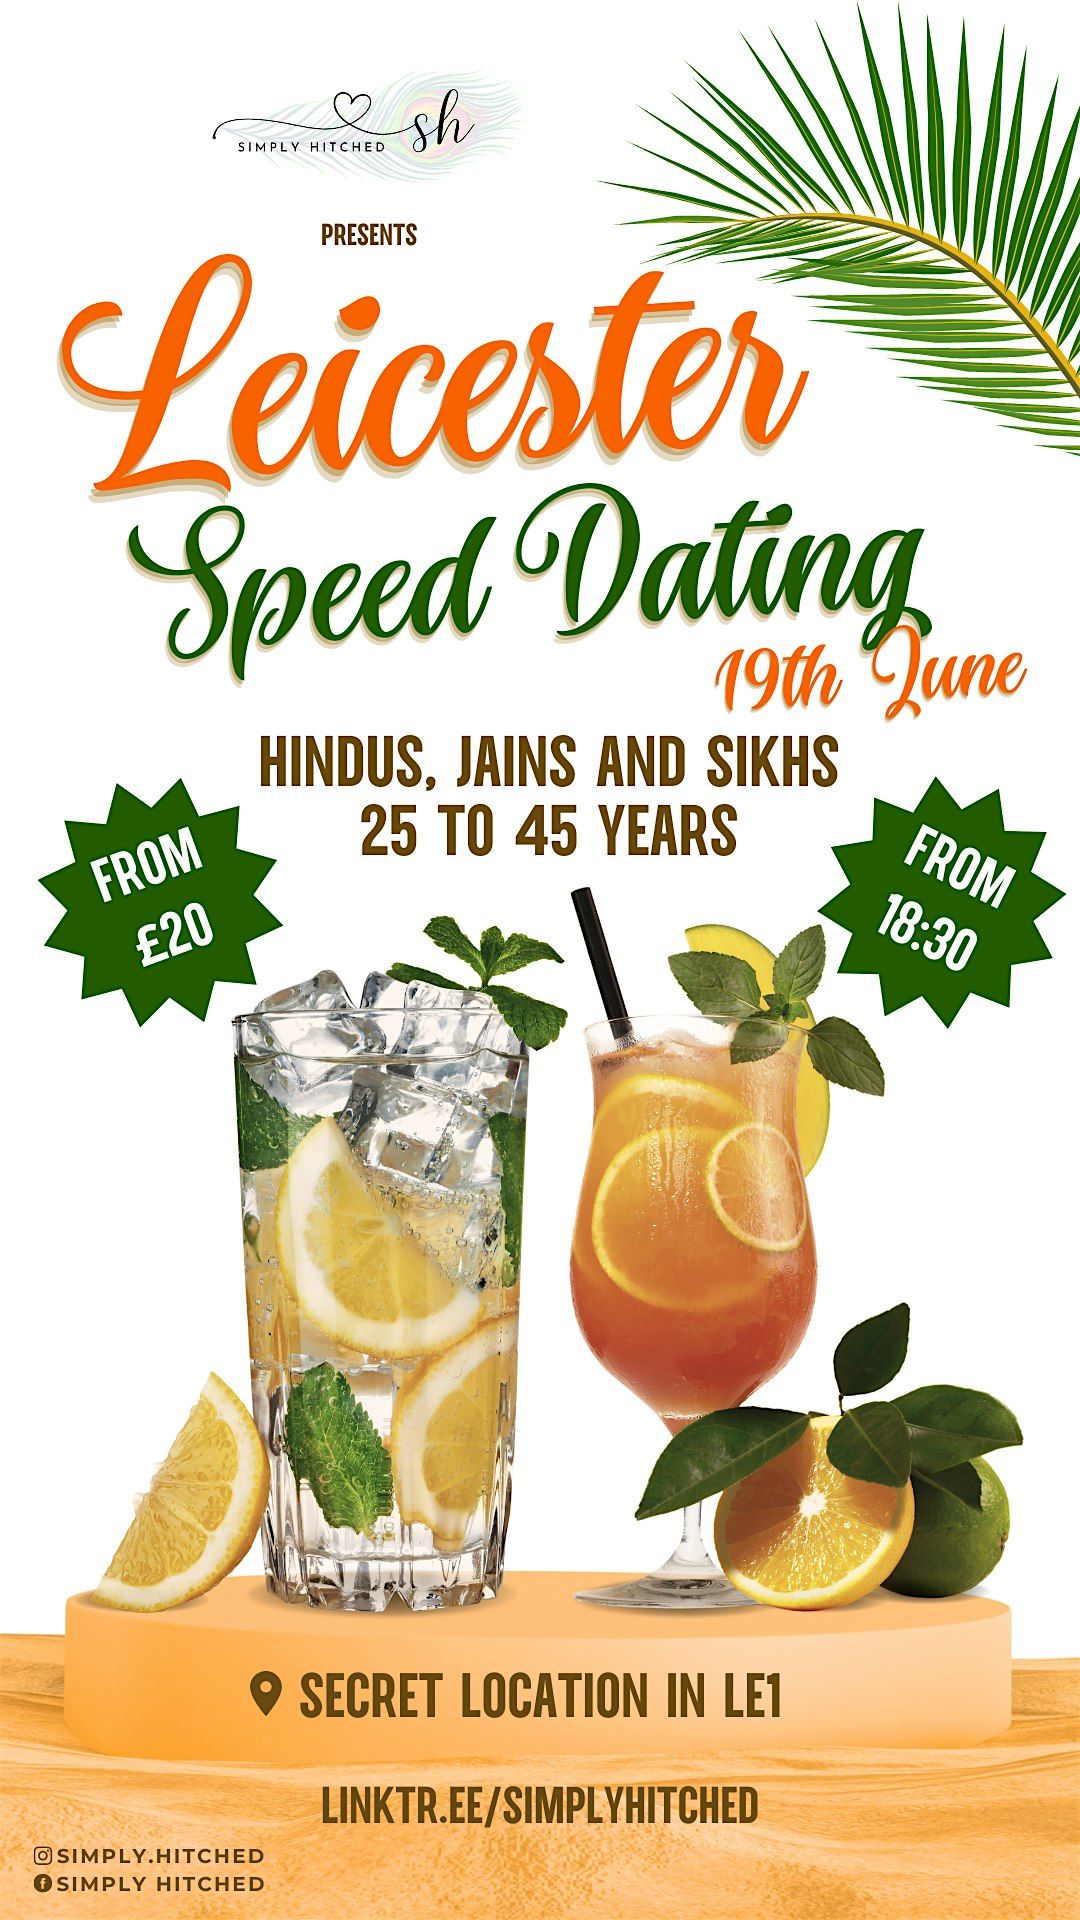 Leicester Speed Dating